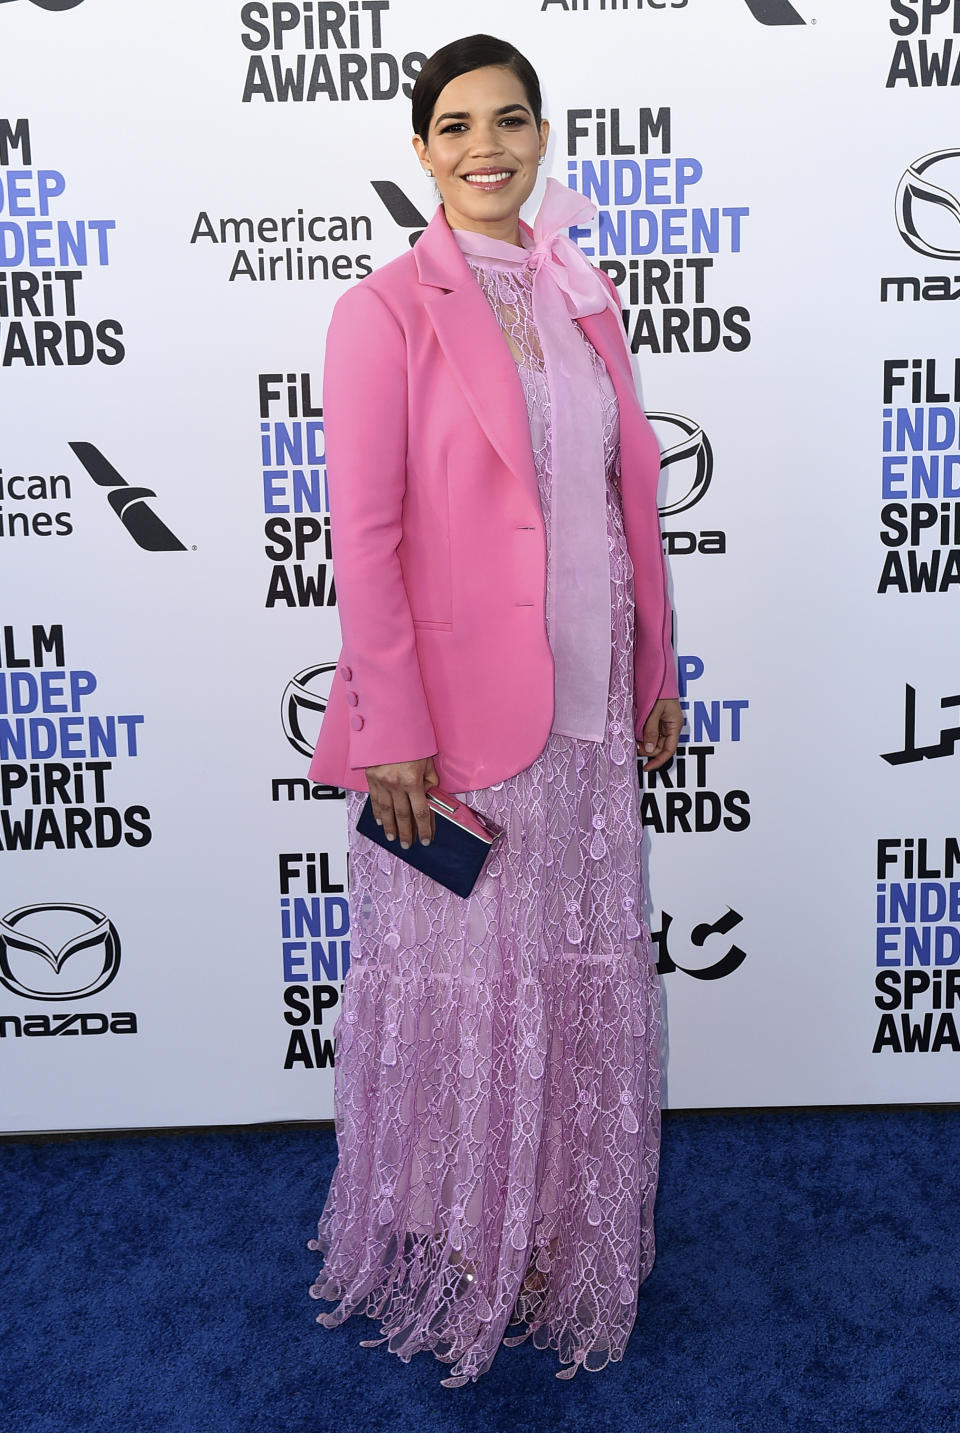 FILE - America Ferrera arrives at the 35th Film Independent Spirit Awards on Feb. 8, 2020, in Santa Monica, Calif. Ferrera turns 37 on April 18. (Photo by Jordan Strauss/Invision/AP, File)